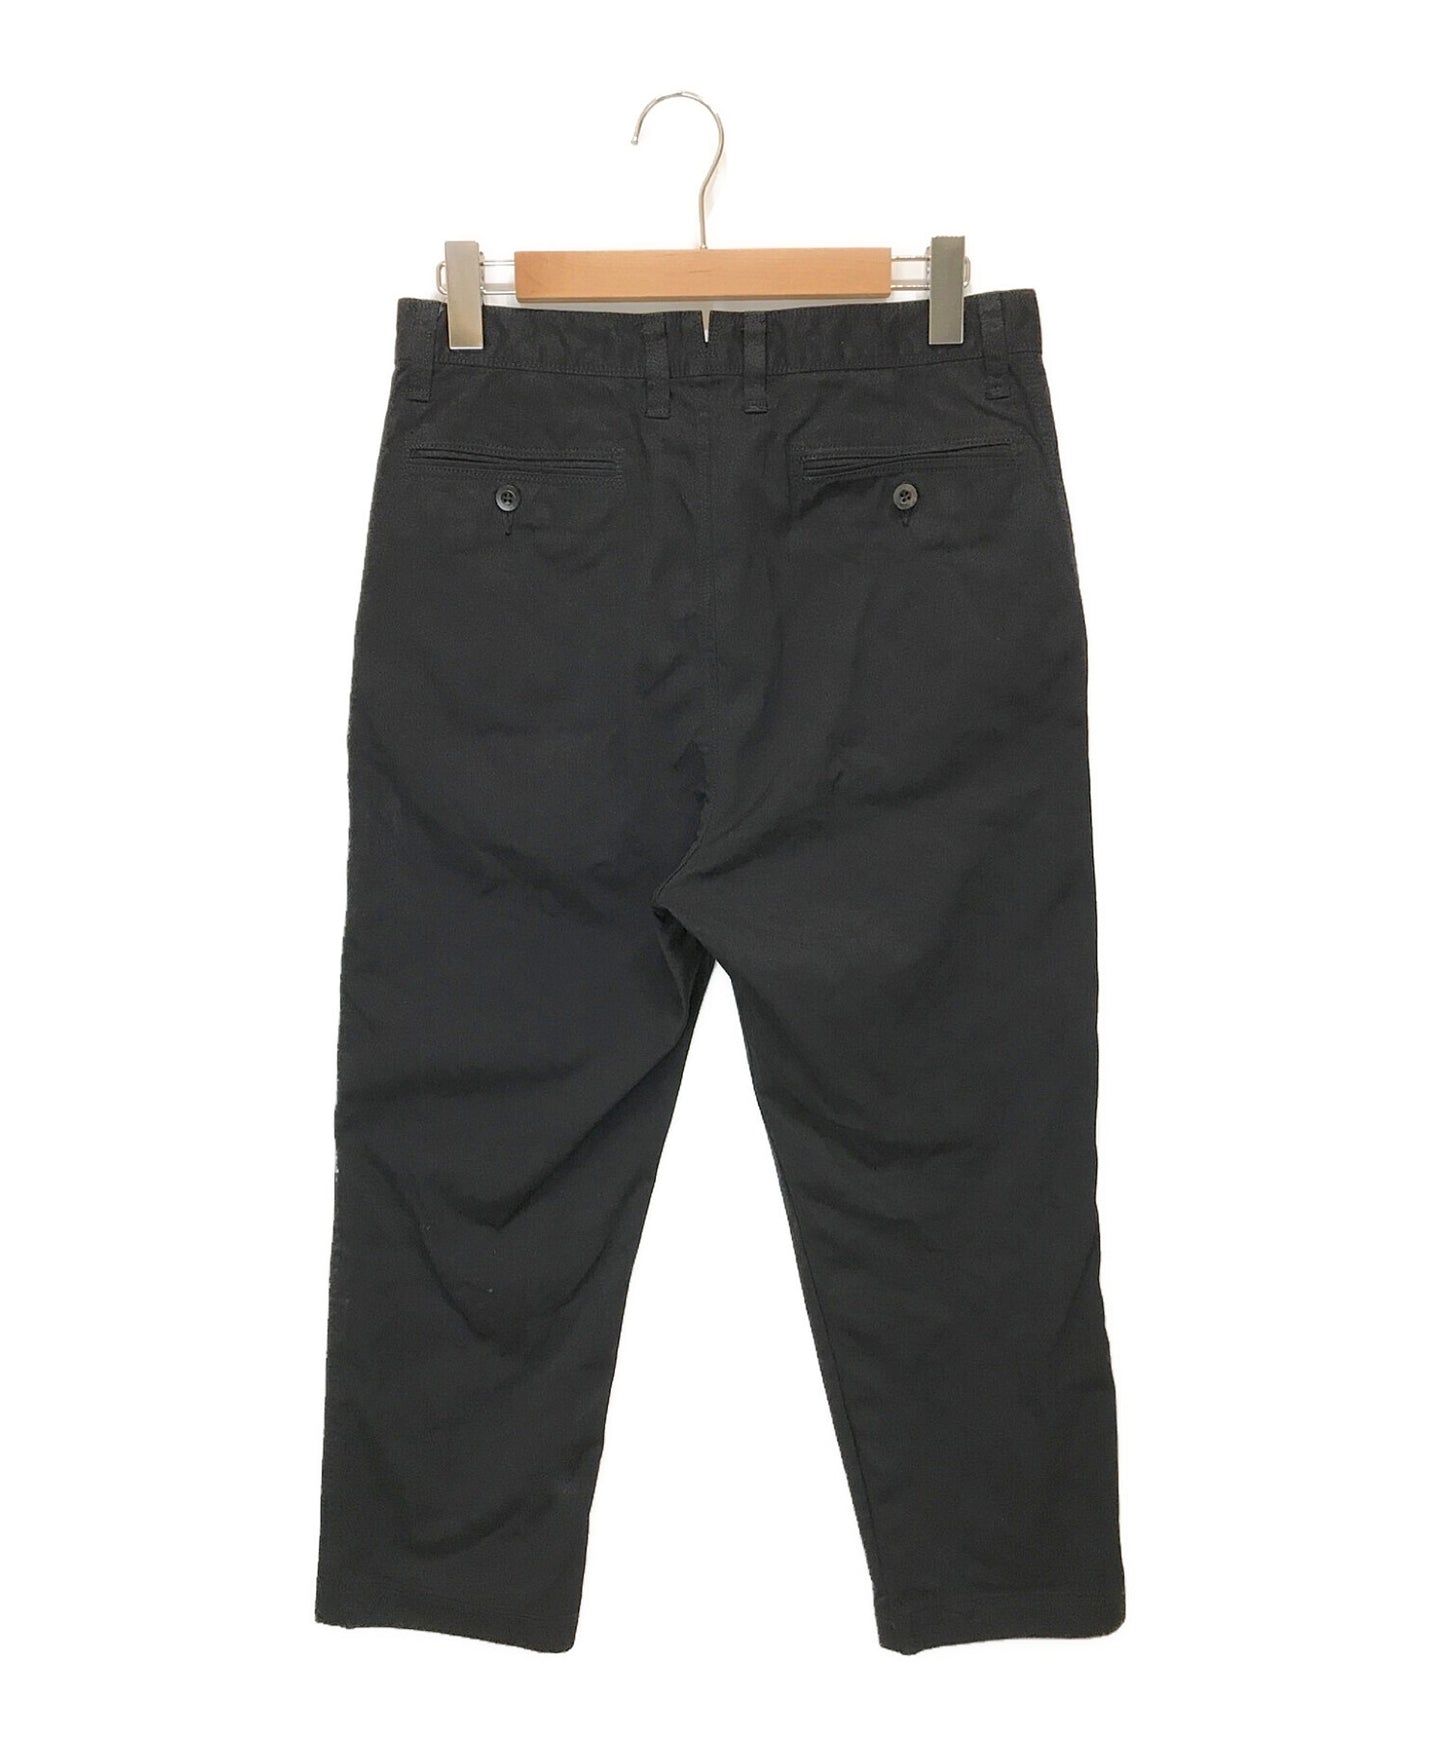 Junya Watanabe Comme des Garcons Nylon Twill Product Product Pants WG-P013